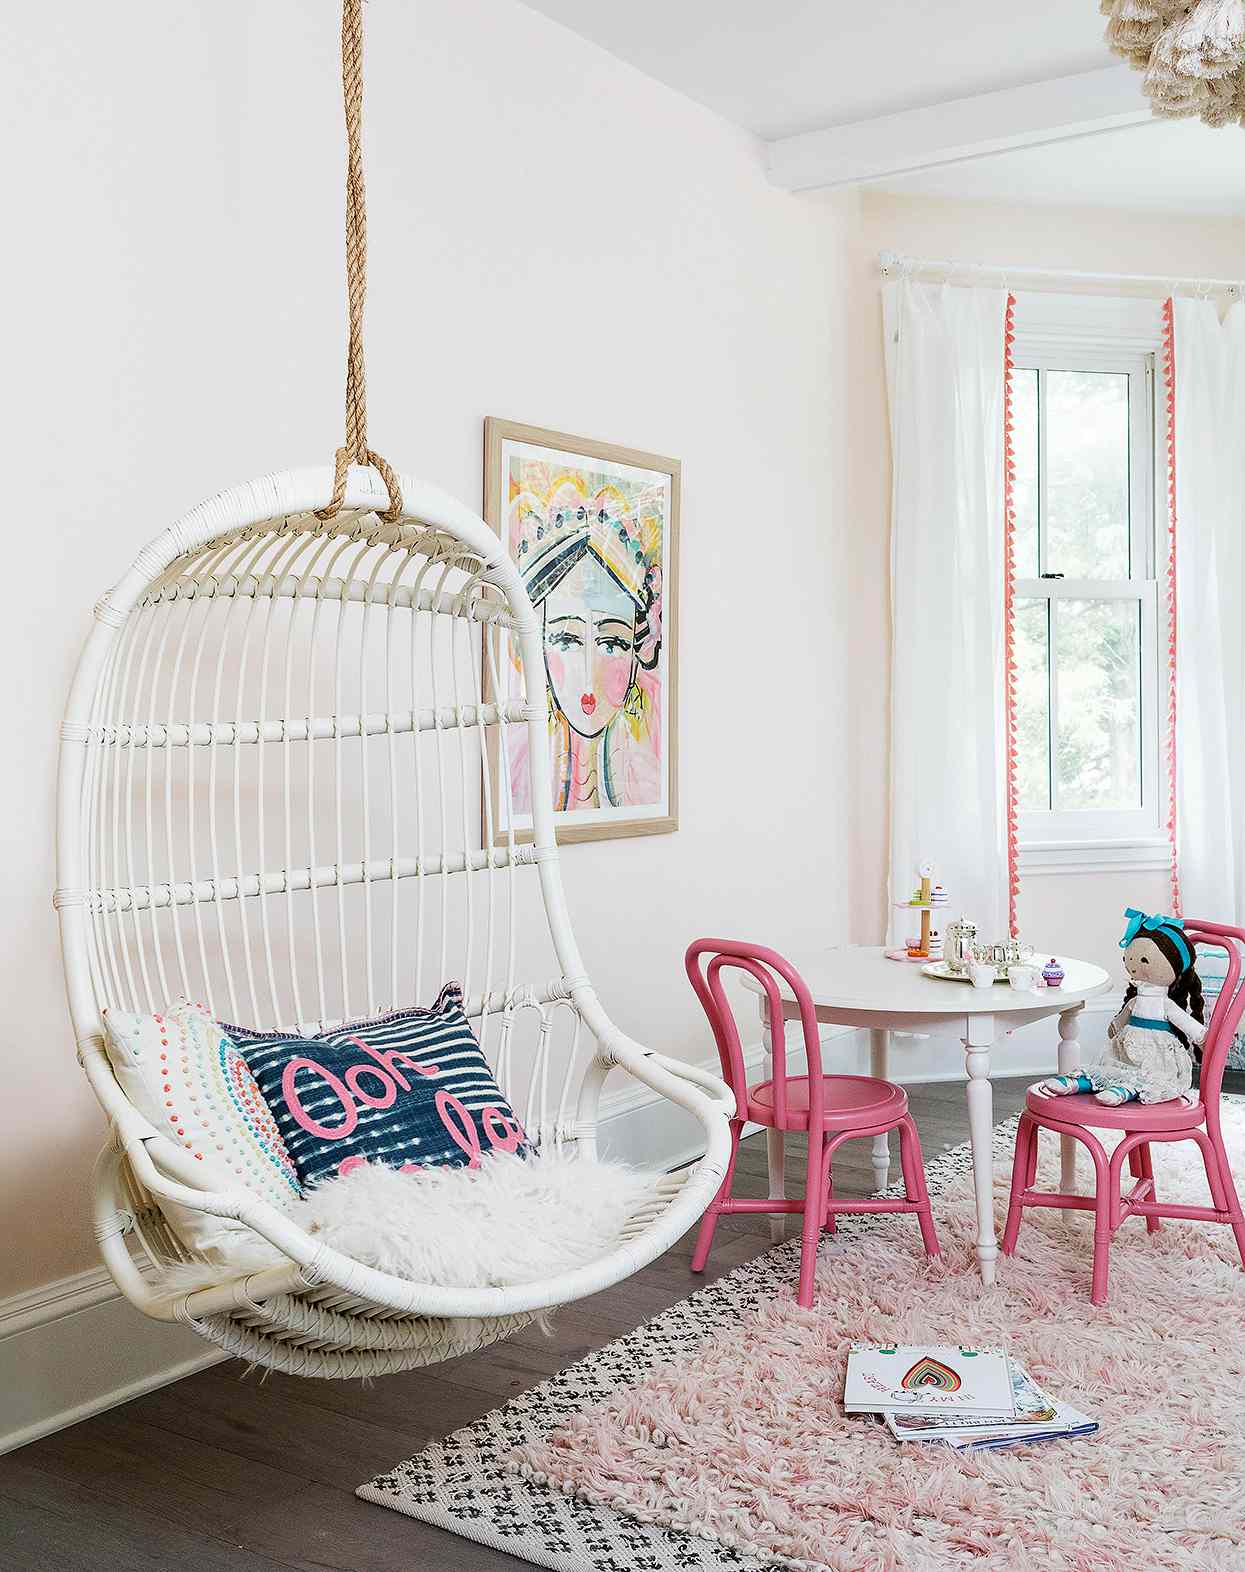 white hanging rattan chair in girls pink bedroom